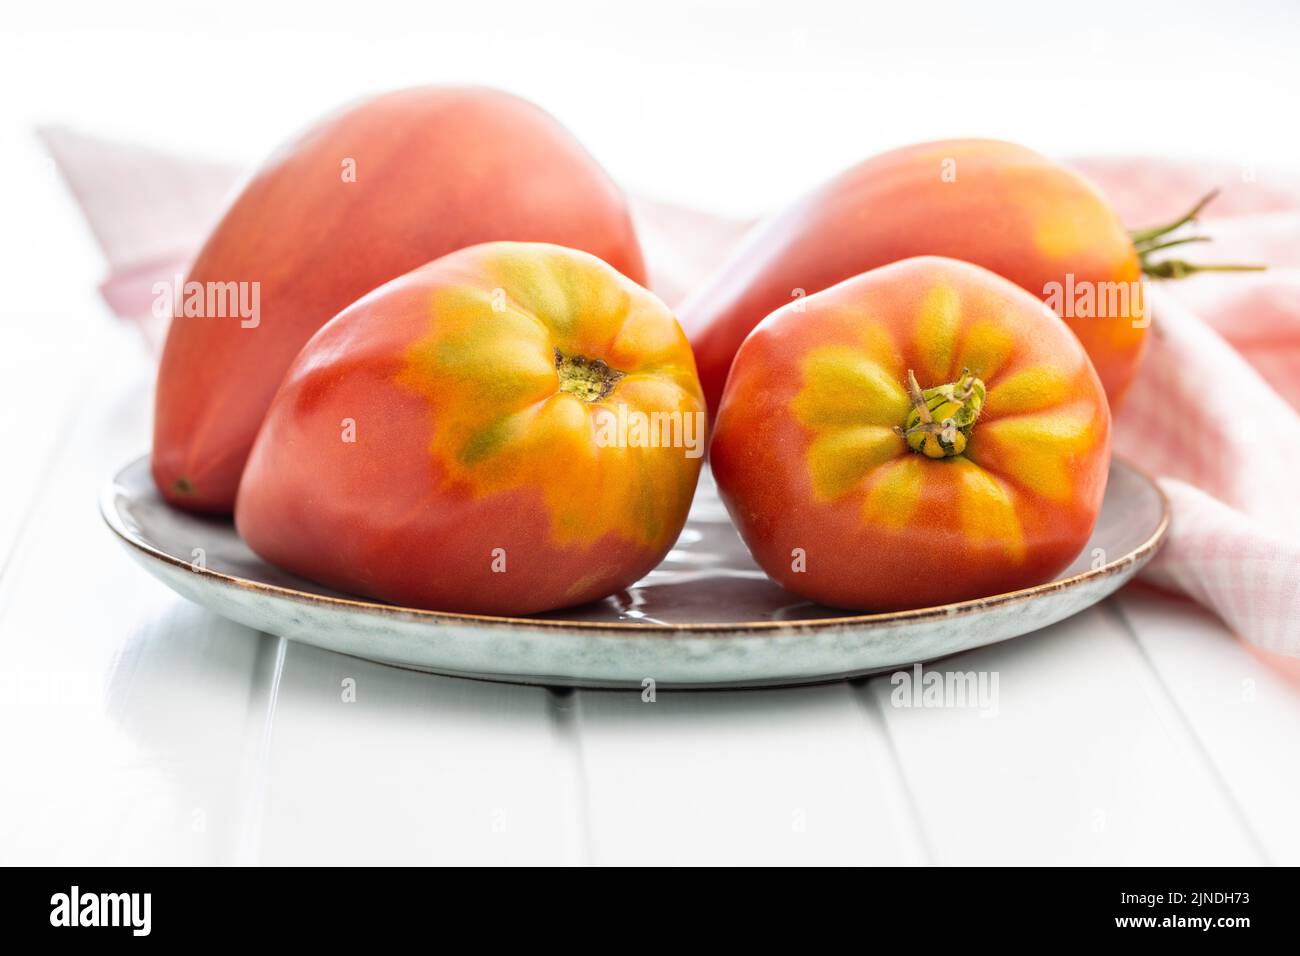 Bull heart tomatoes on plate on a white table. Stock Photo